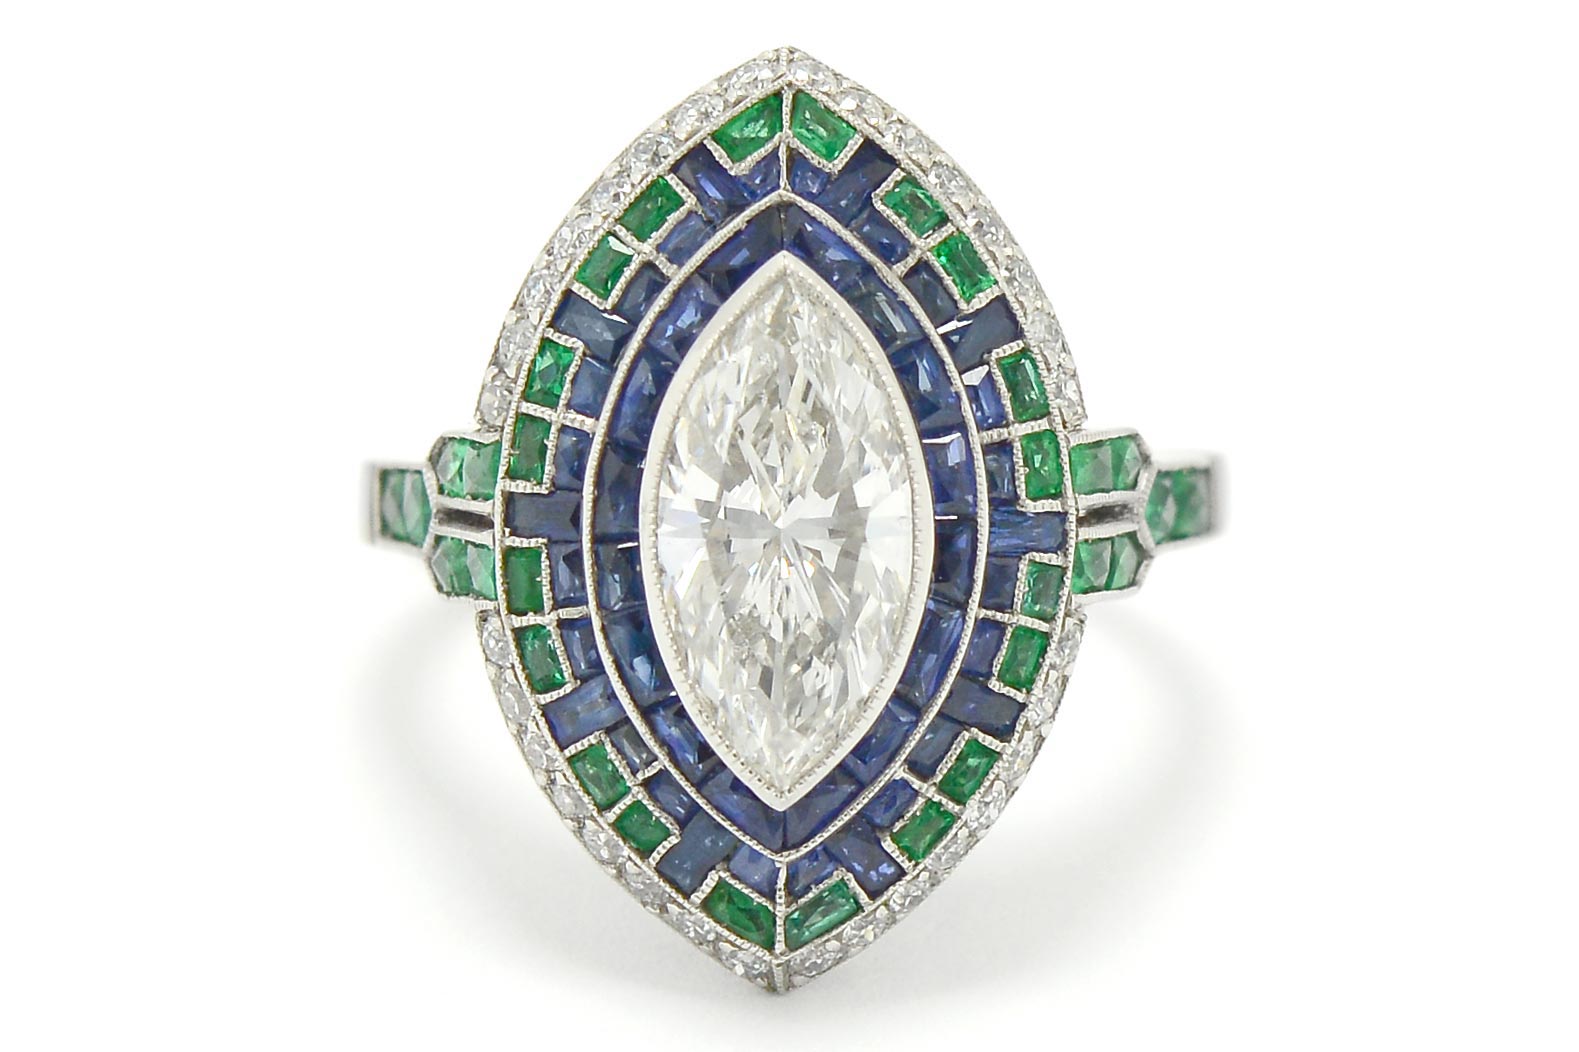 A 4 carat marquise cut diamond in a sapphire and emerald Art Deco mosaic engagement ring.